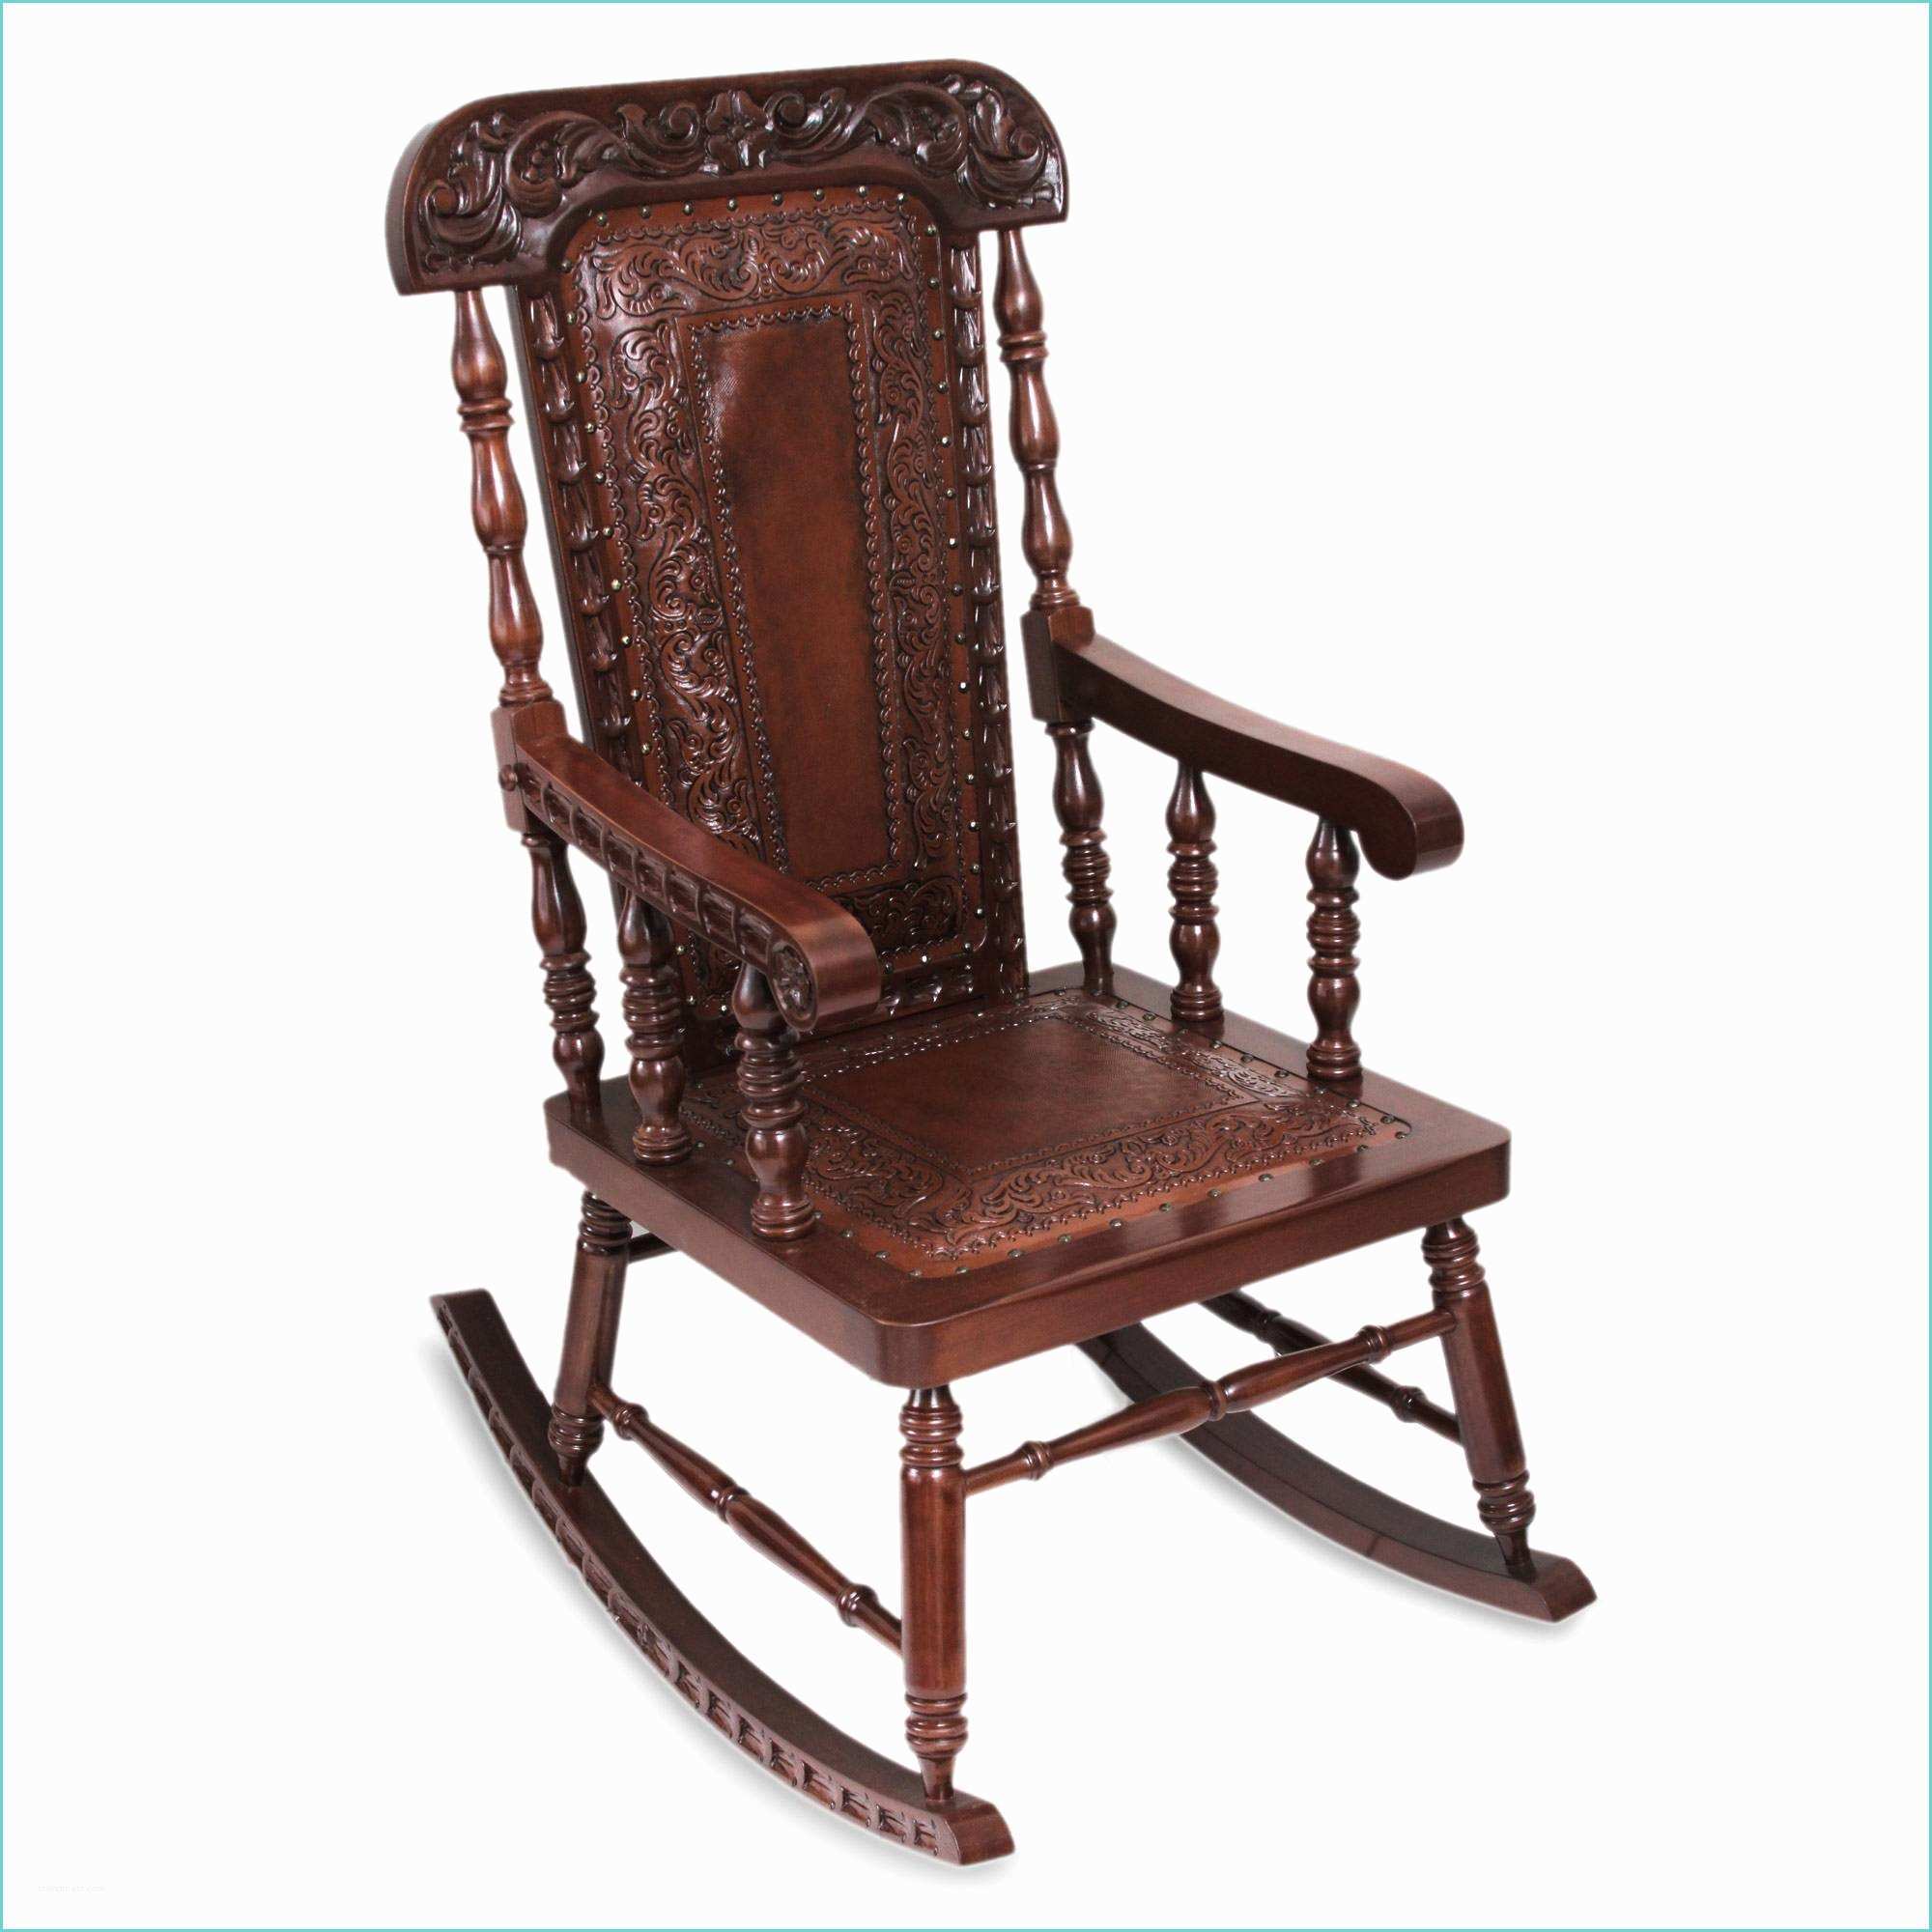 Originals Chairmakers Rocking Chair New Handmade Rocking Chair Rtty1